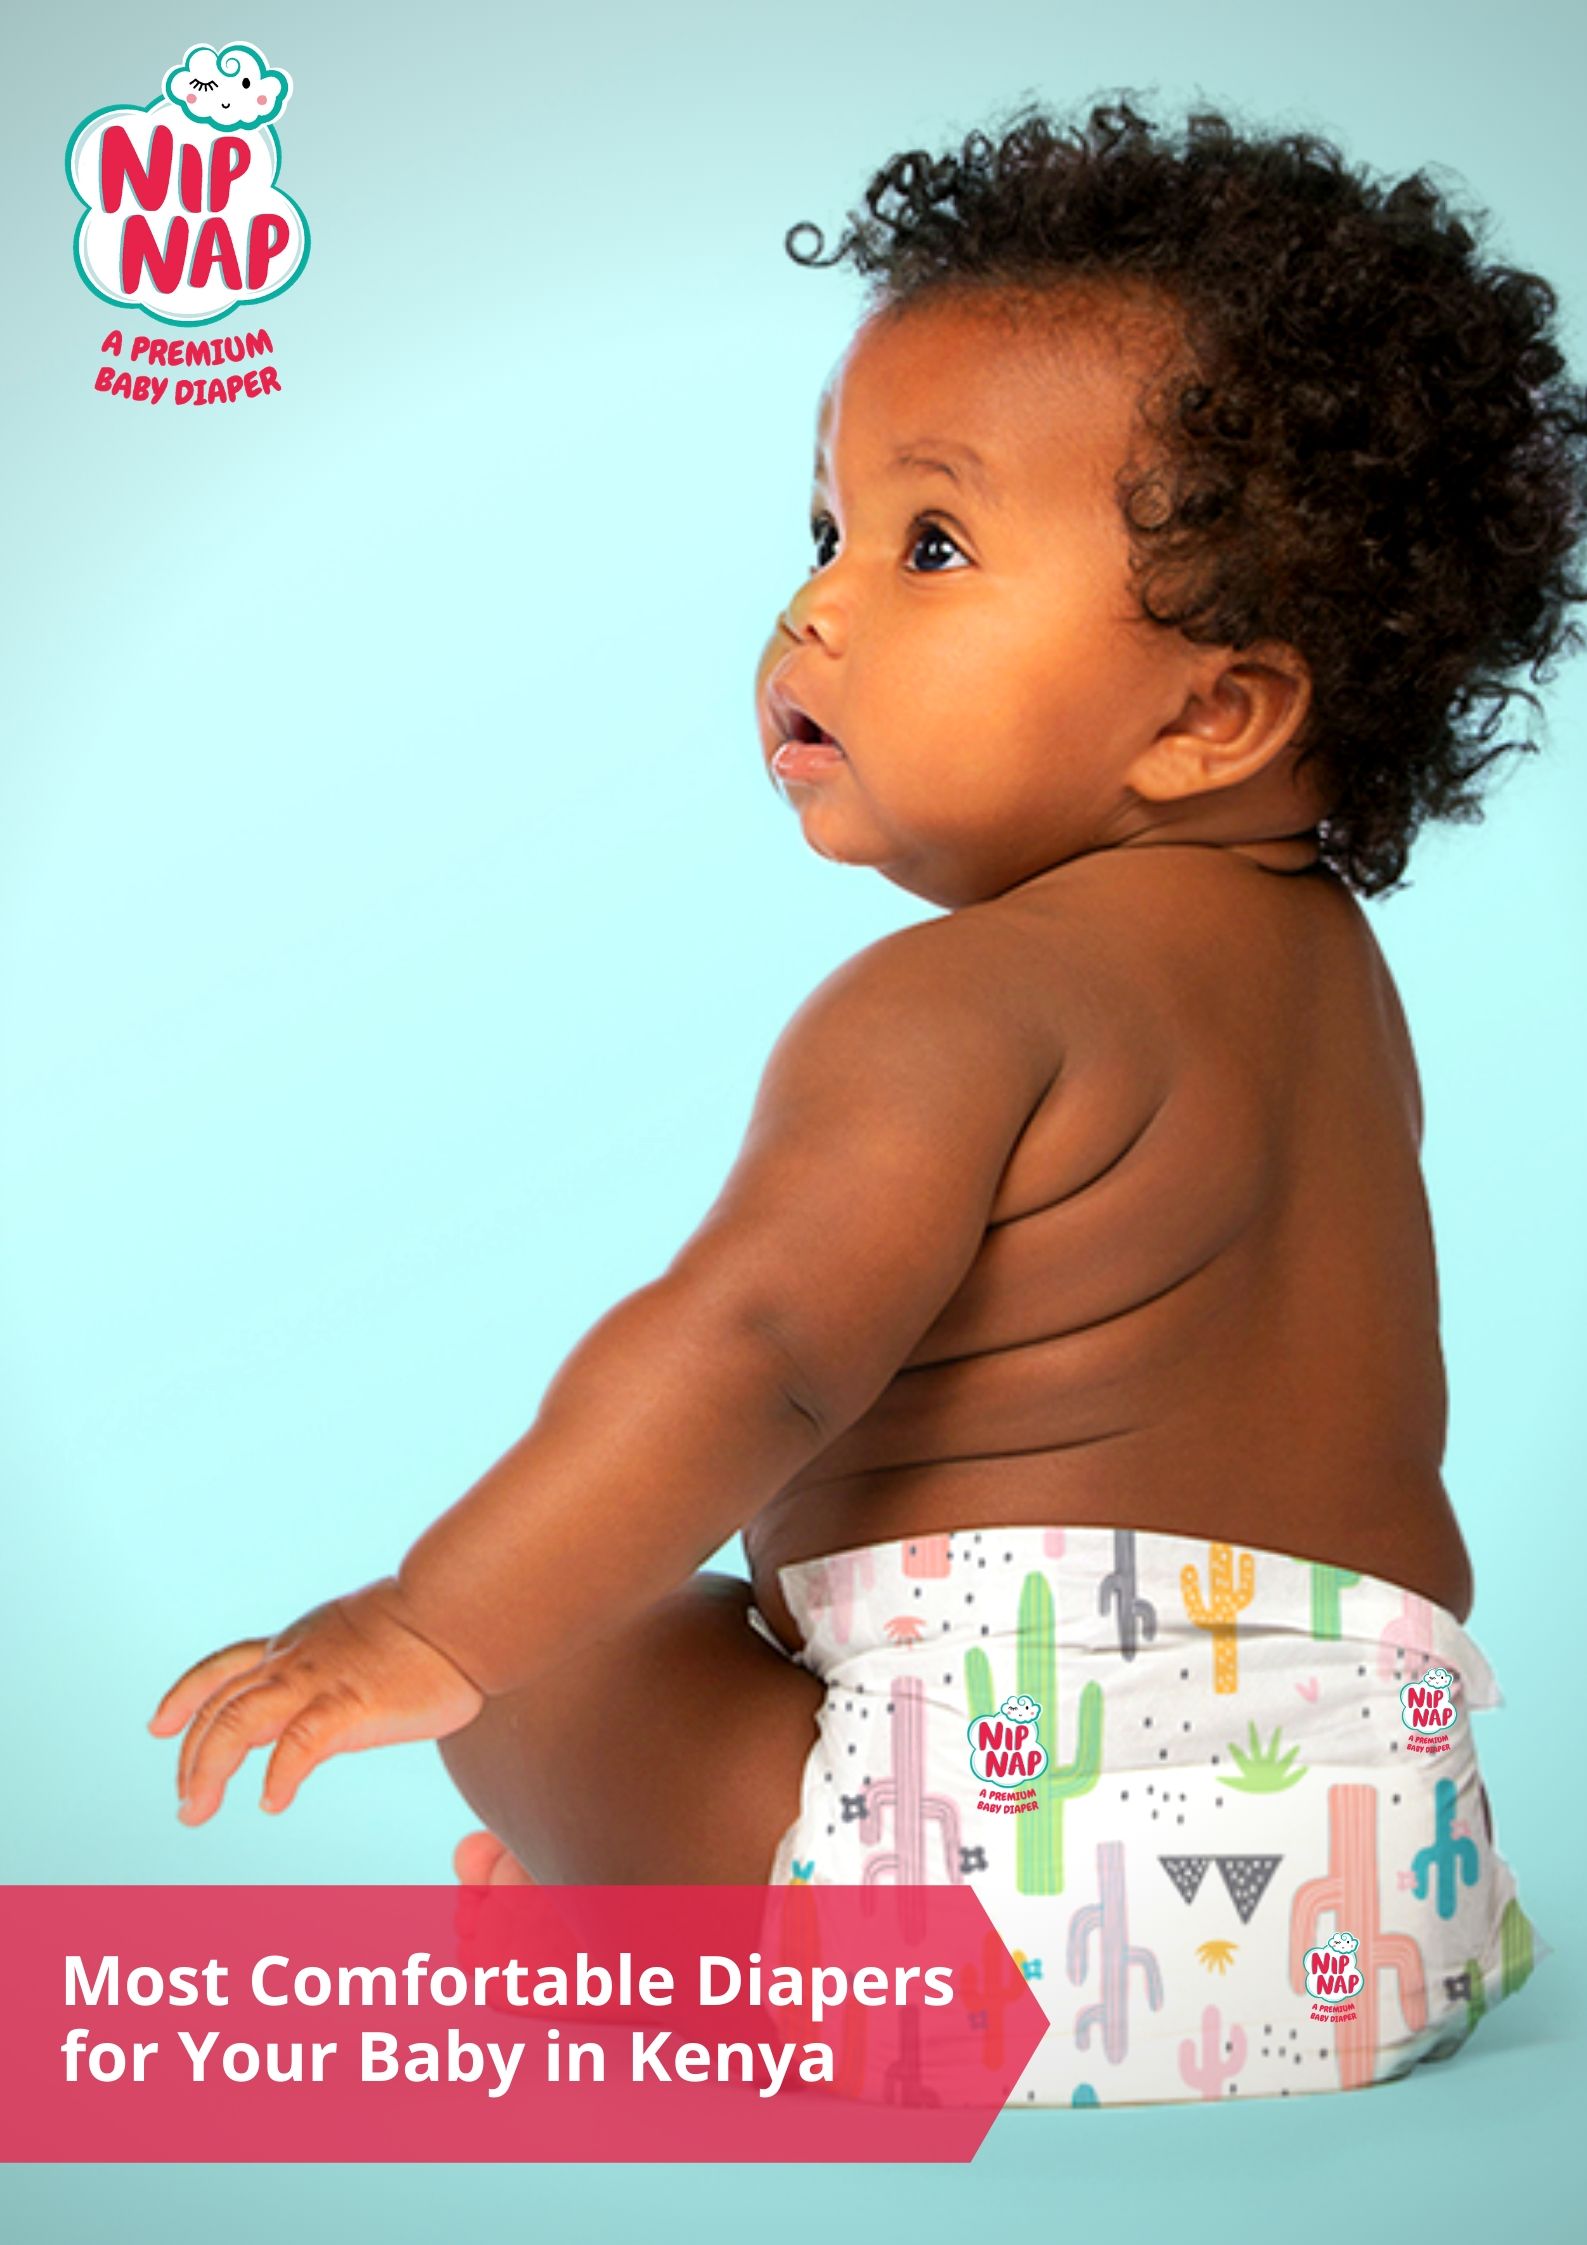 Most Comfortable Diapers for Your Baby in Kenya